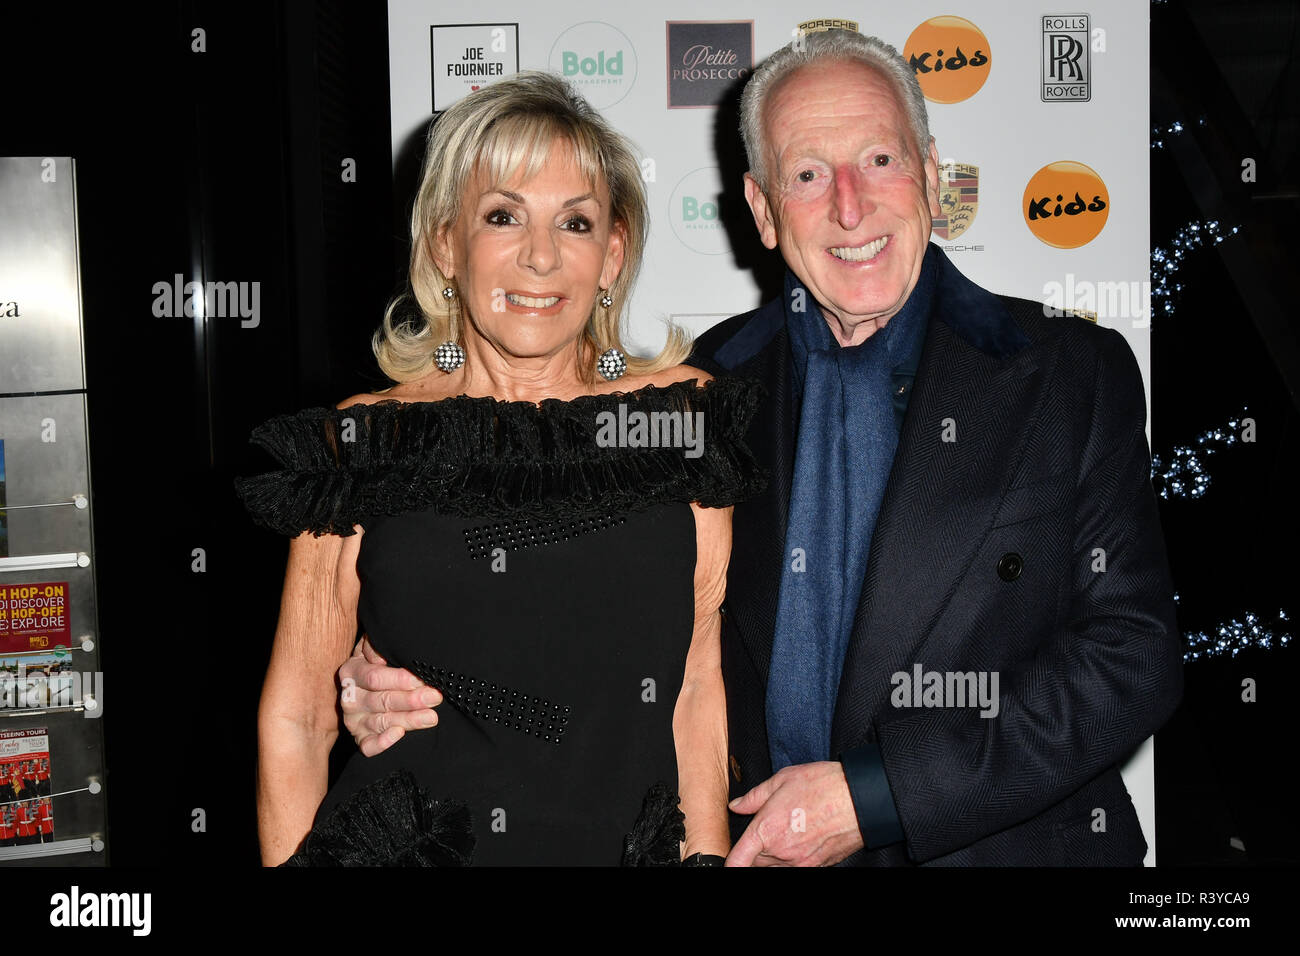 Joe Fournier hosts a dinner to raise funds for KIDS, a charity that supports disabled children, young people and their families at Riverbank Park Plaza on 24 November 2018, London, UK. Credit: Picture Capital/Alamy Live News Stock Photo